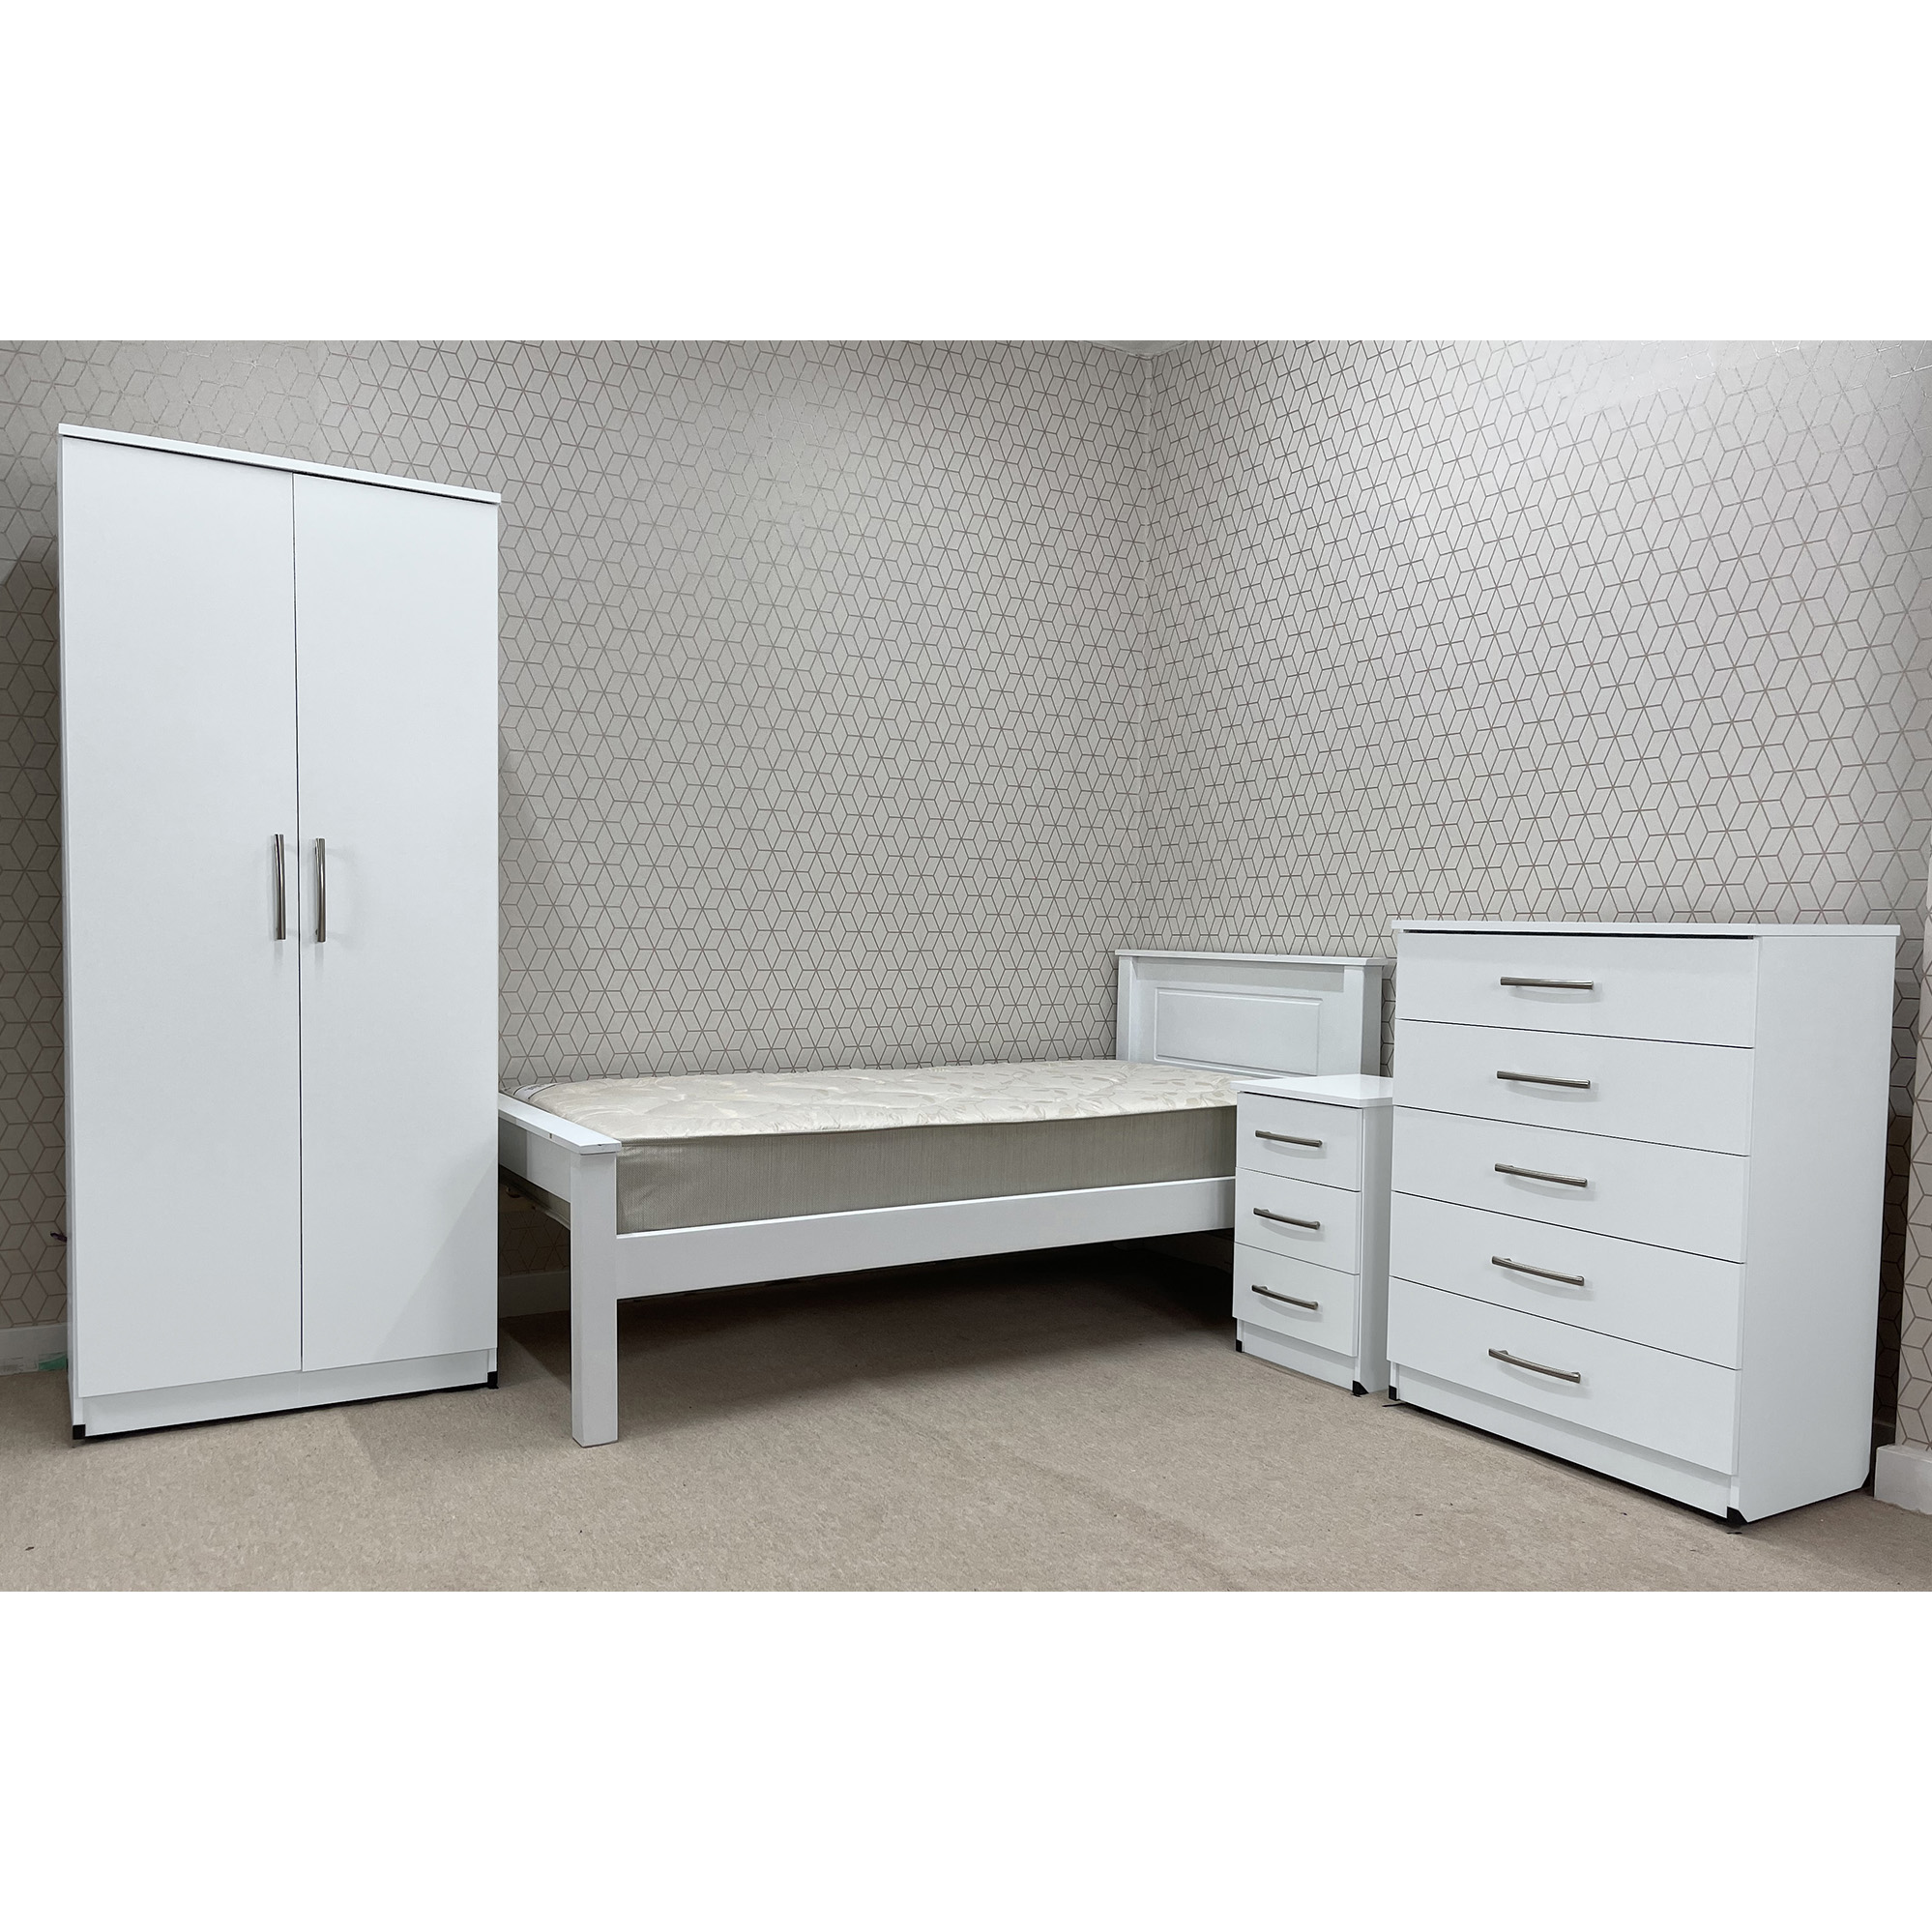 hmo furniture package landlord furniture package 2s